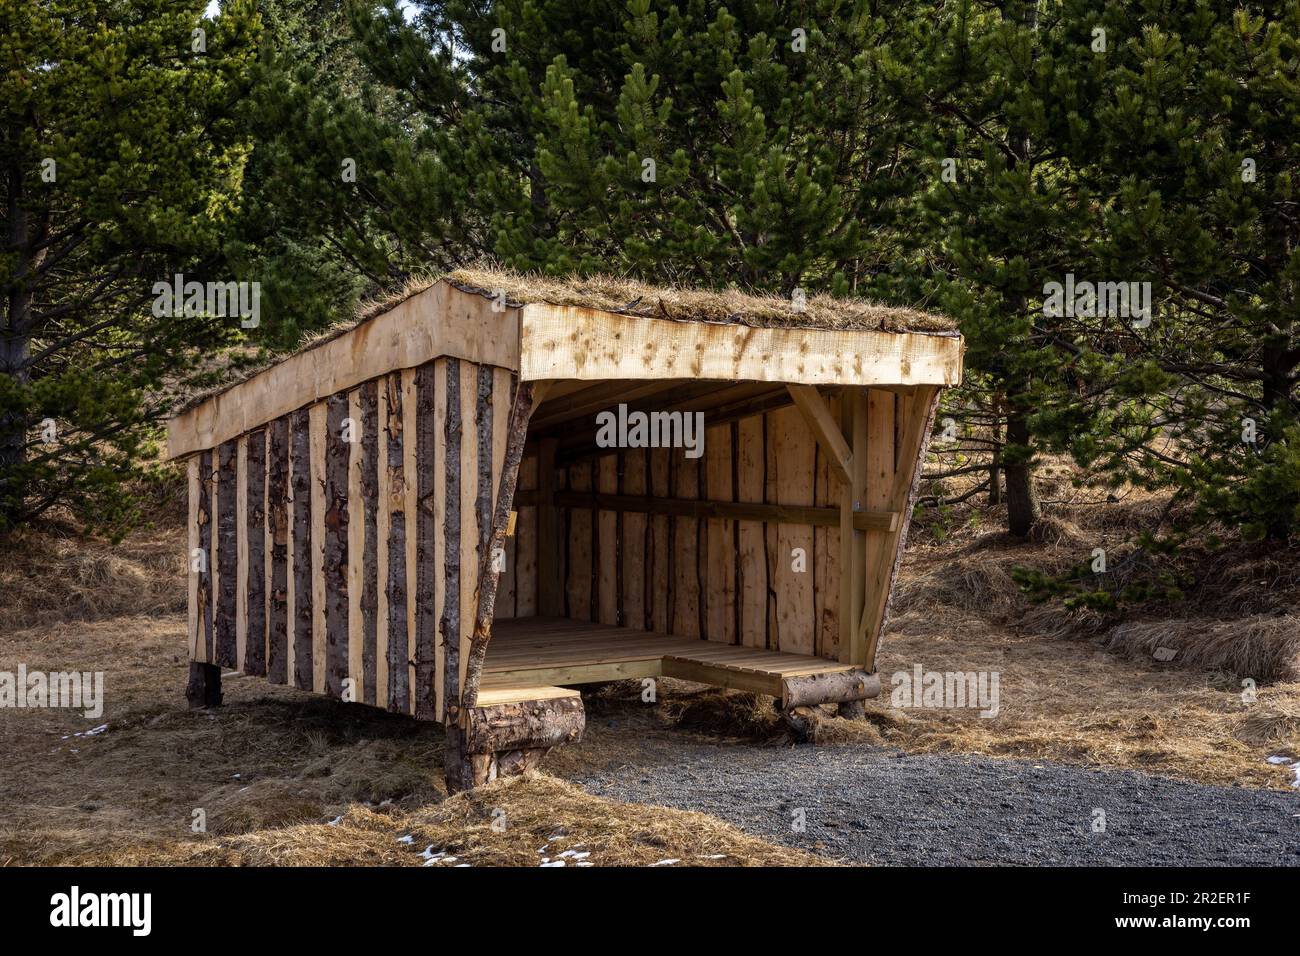 Wooden picnic hut with grass roof in the forest in Reykjavik, Iceland. Stock Photo